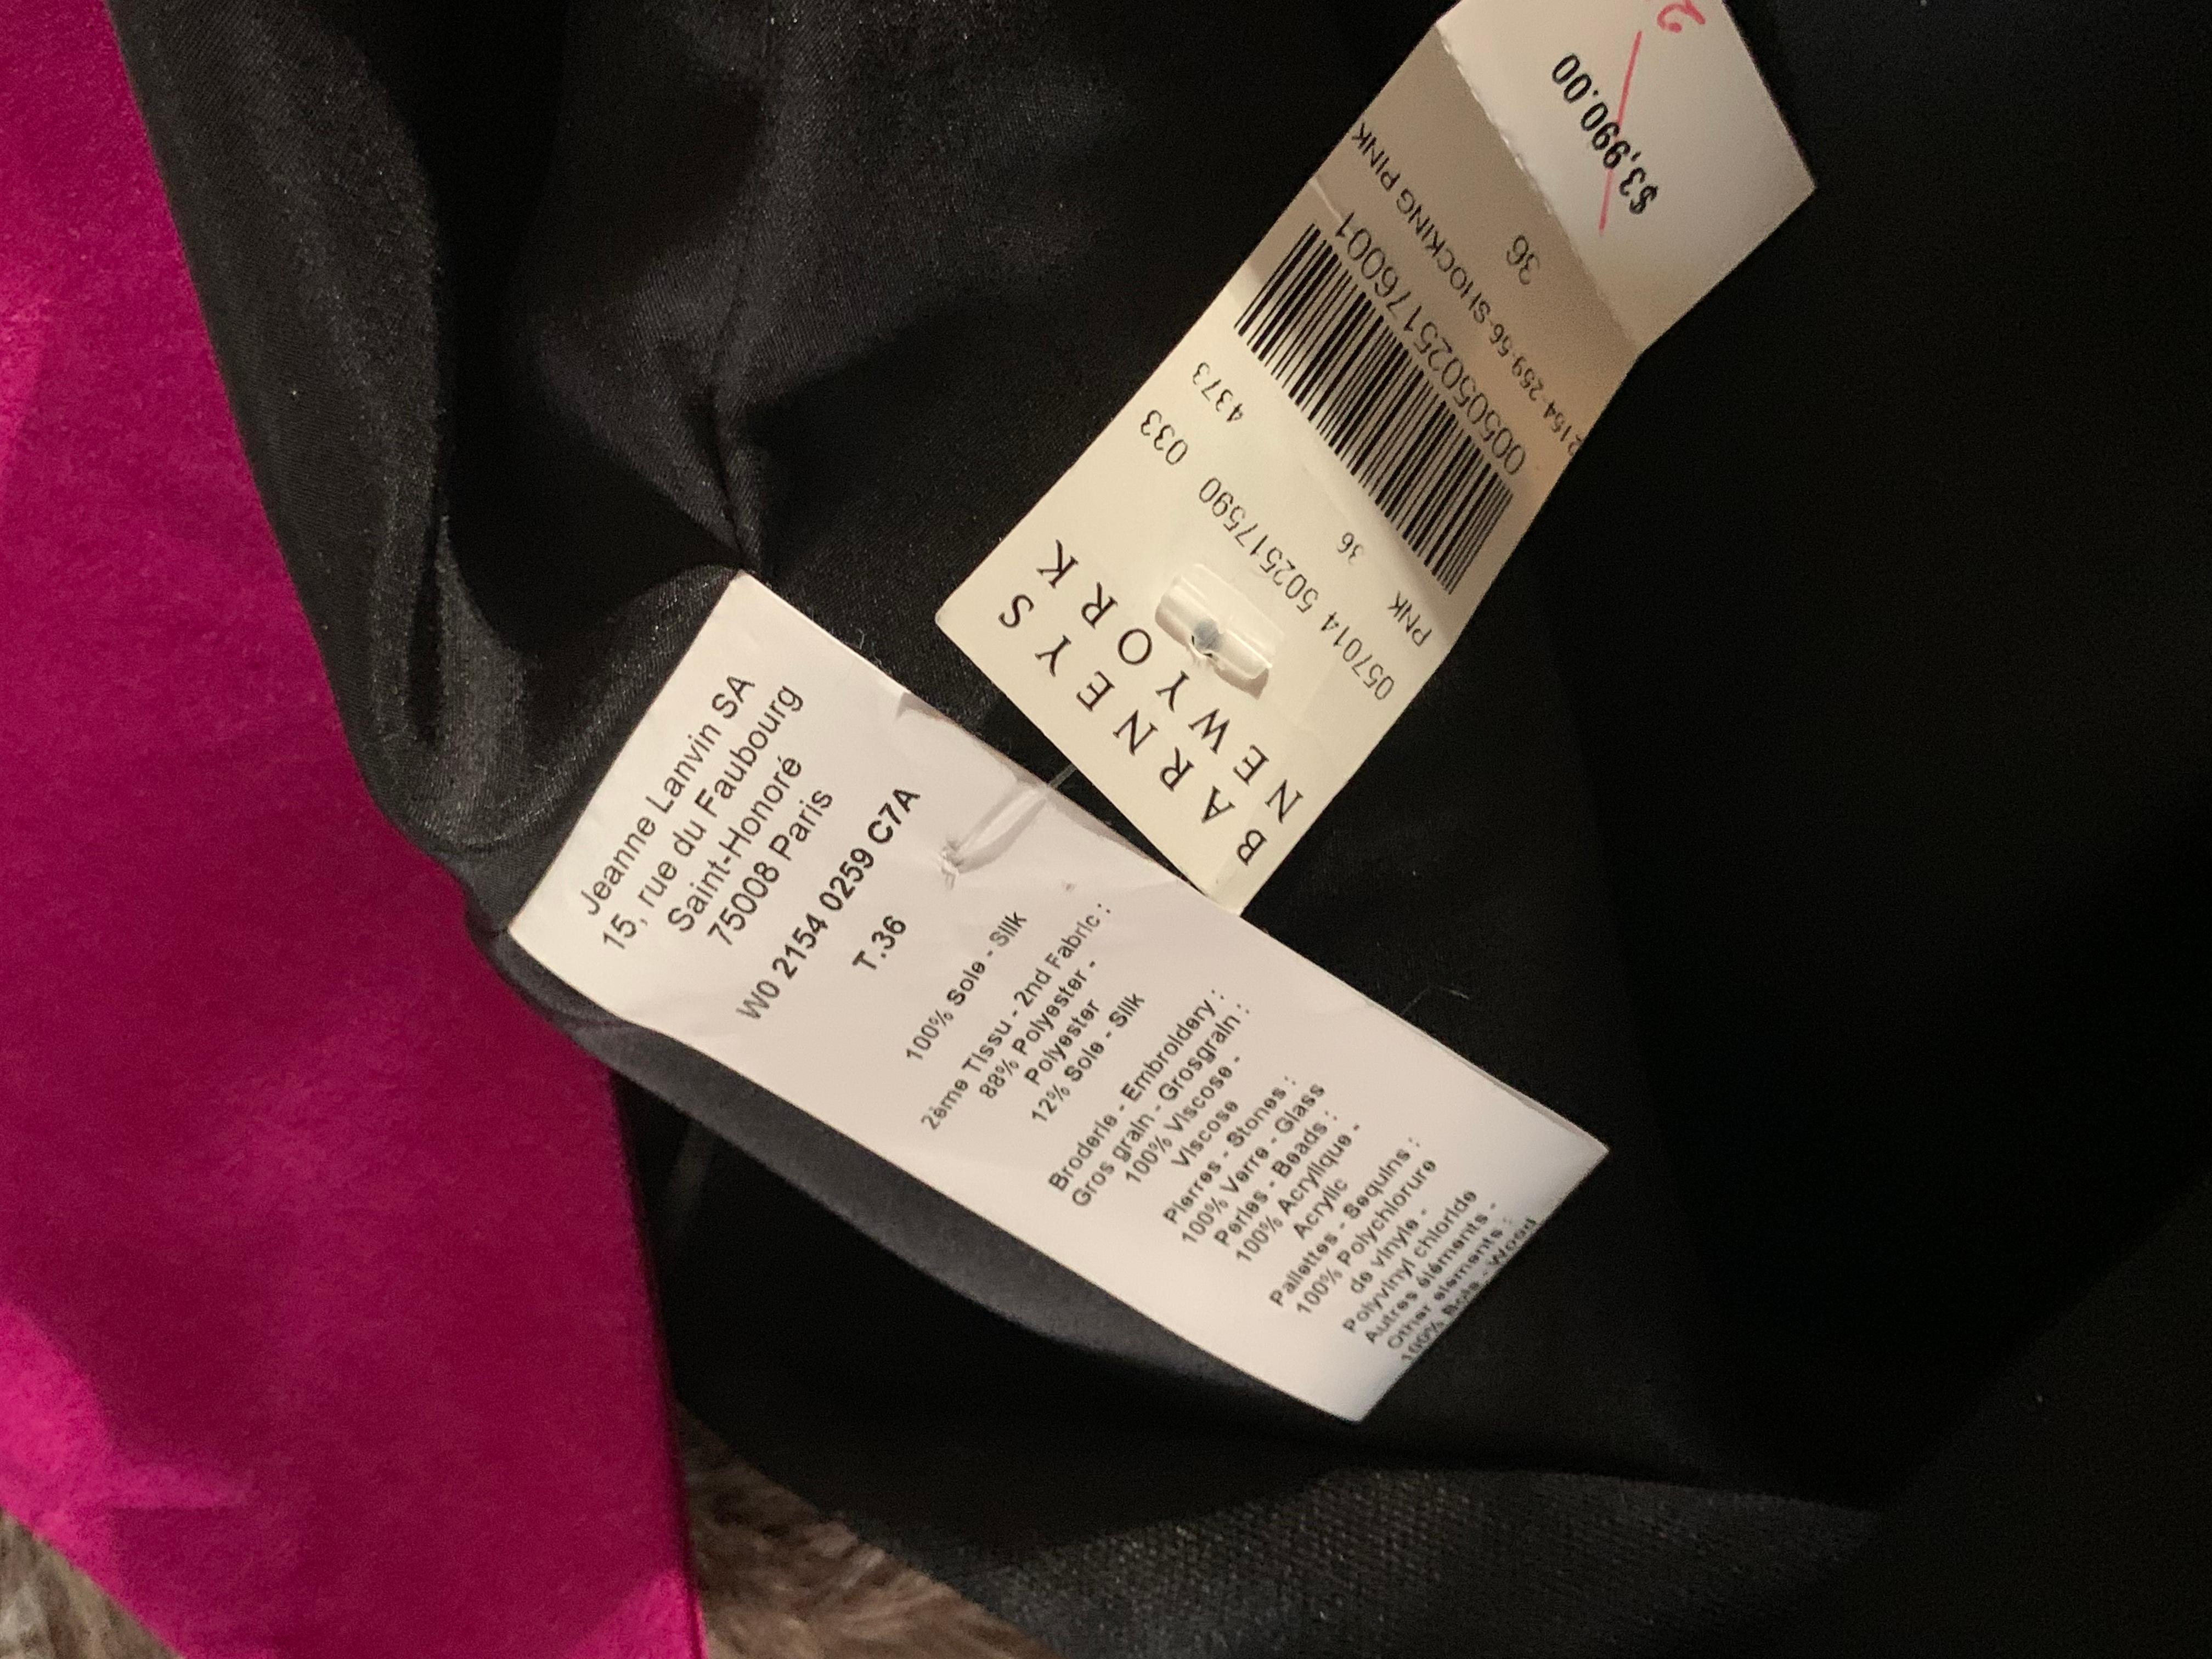 Lanvin Paris 2013 Shocking Pink & Black Beaded Modern Chemise Dress NWT Size 4-6 In Good Condition For Sale In Palm Springs, CA